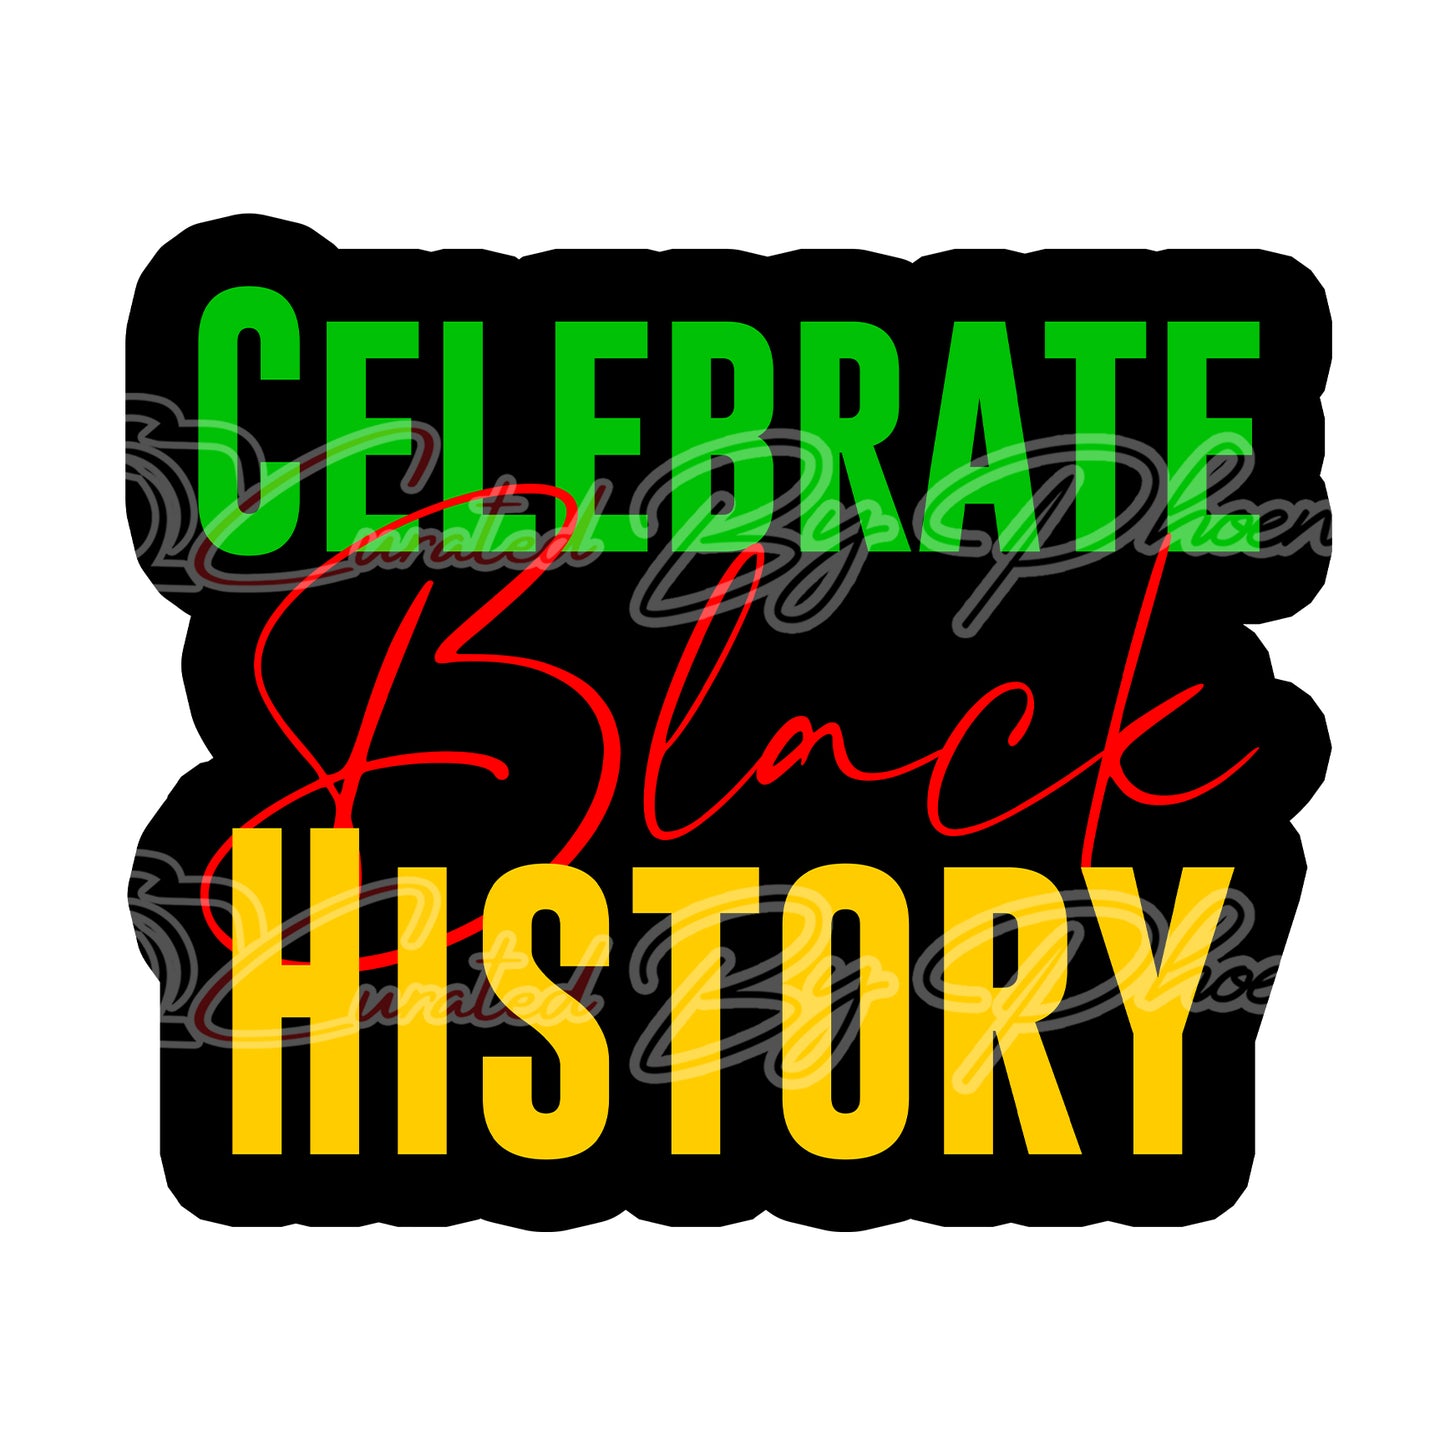 celebrate black history prop-black history prop-black history photo booth prop custom props- custom prop signs-props -Curated by Phoenix 